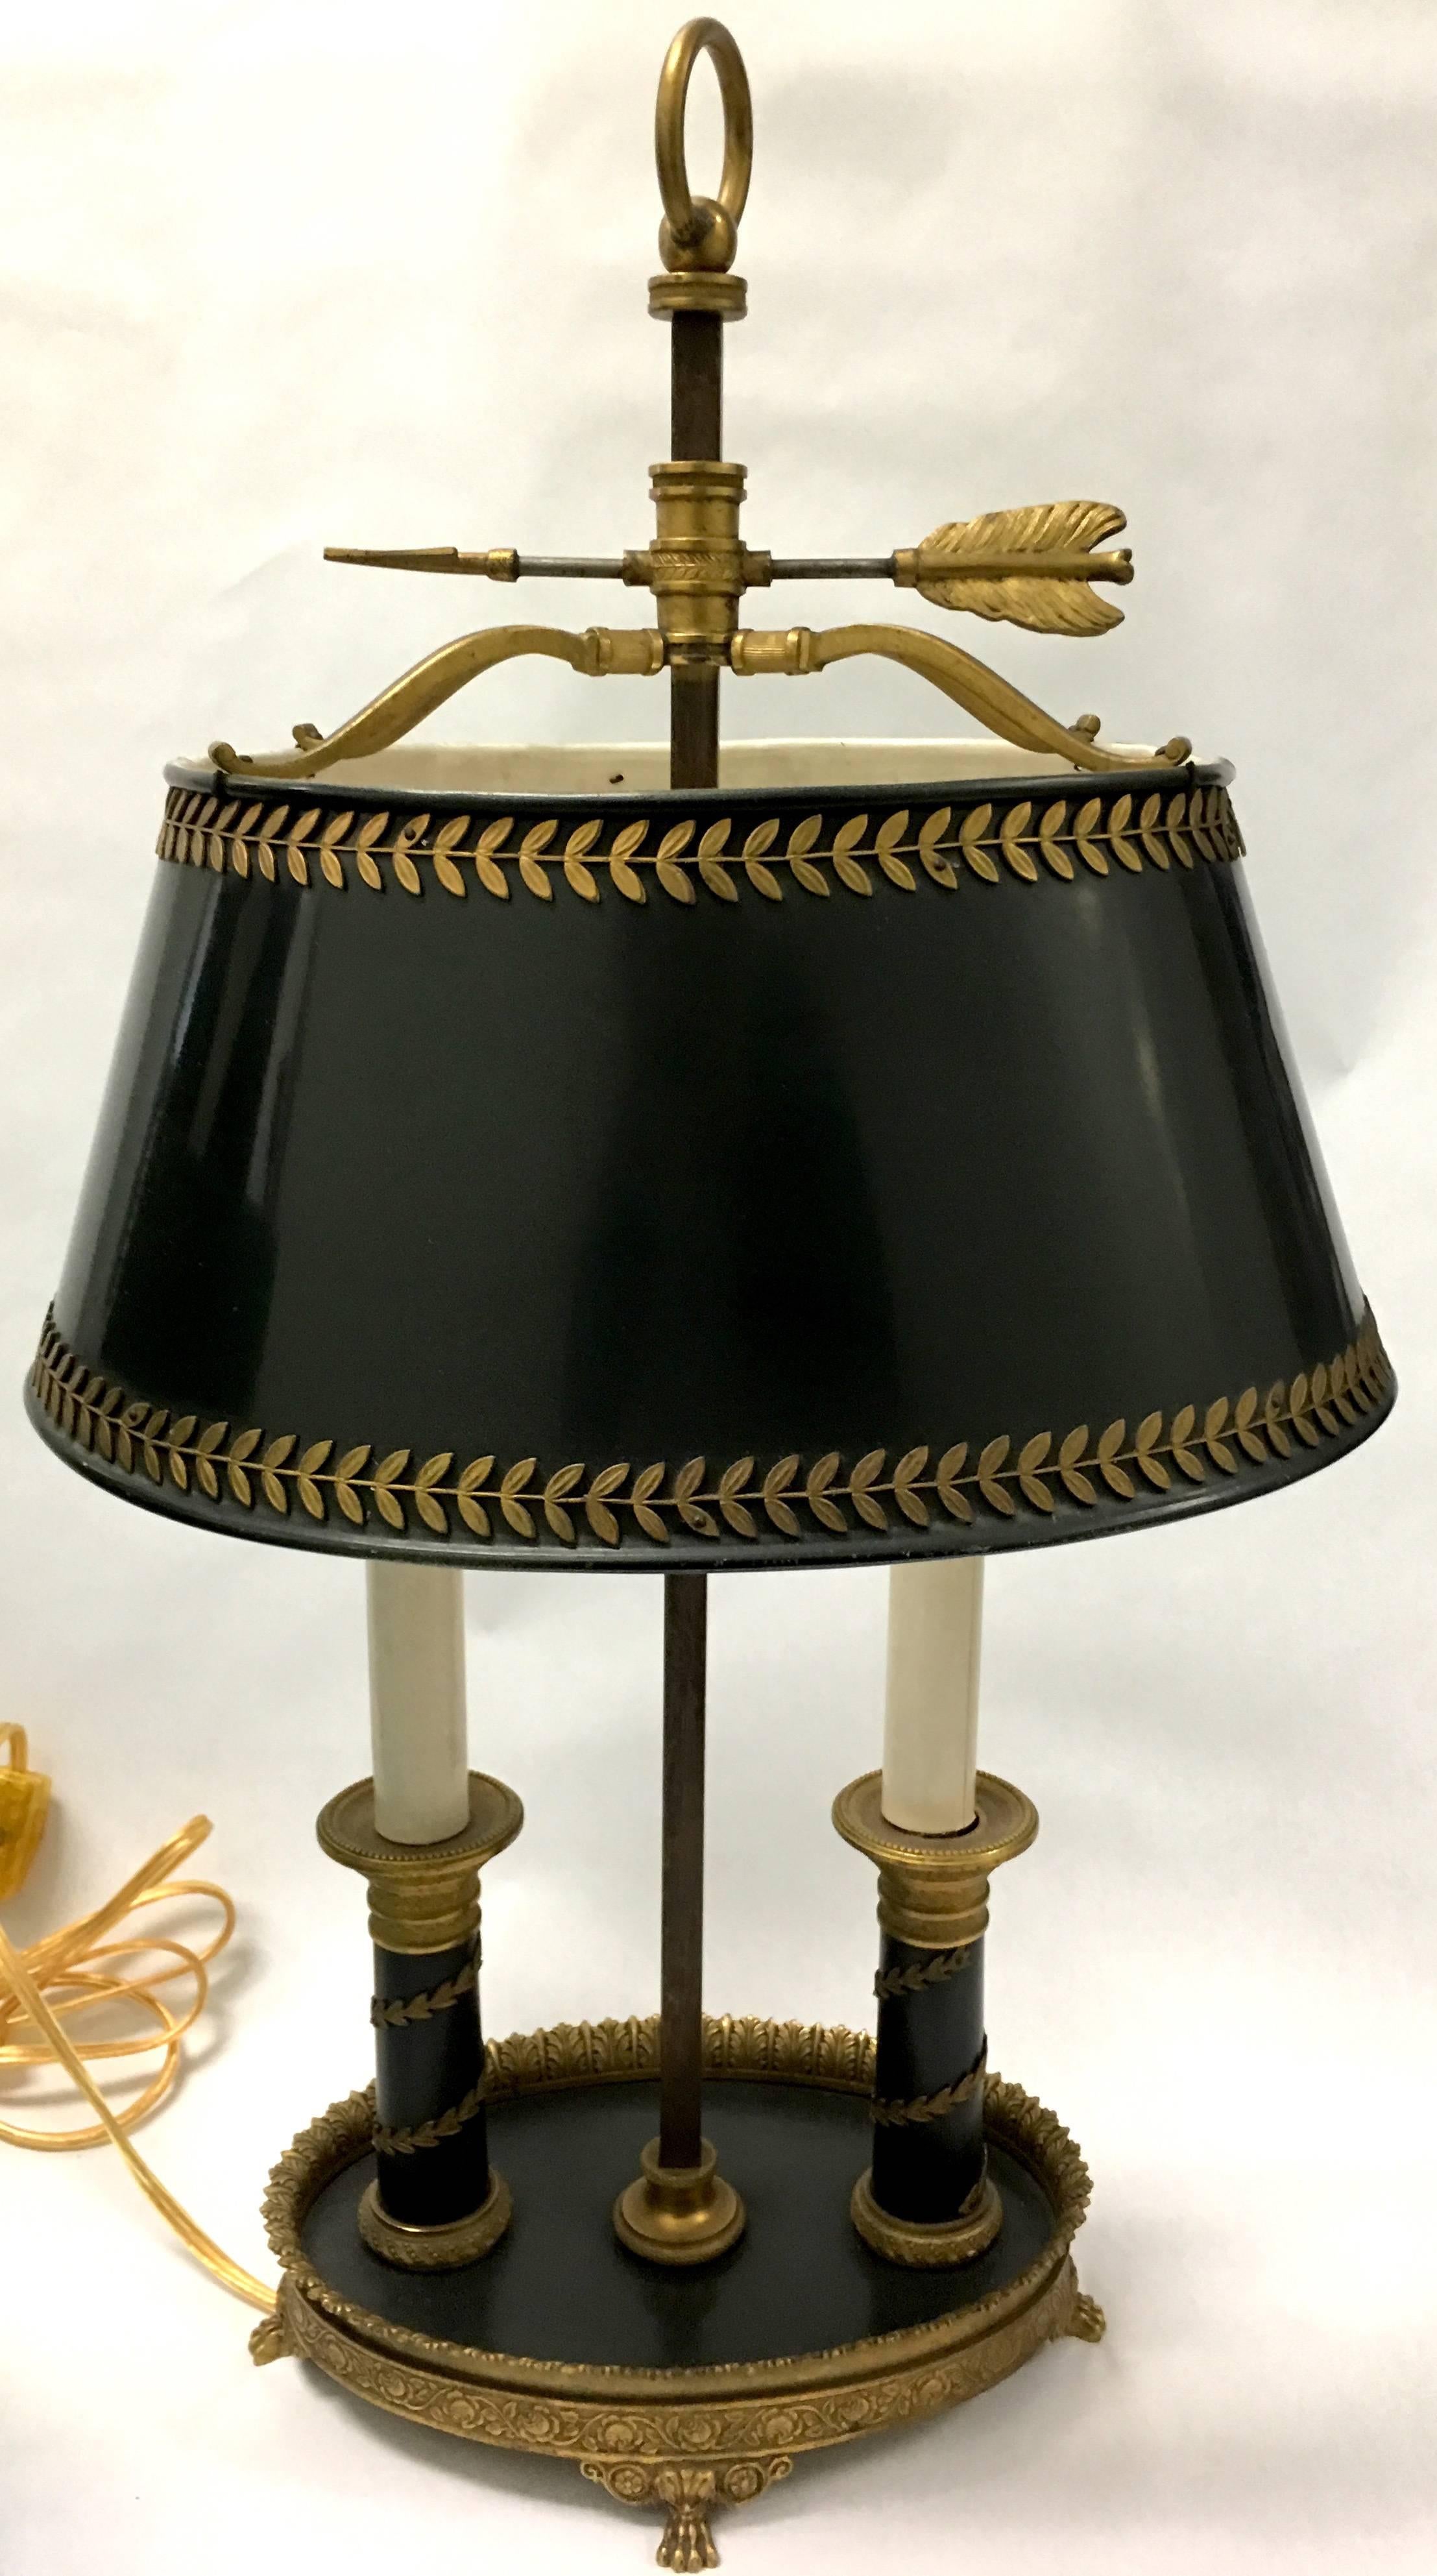 Pair of late 19th century bouillotte table lamps. Lamps feature original elements and original black tole lampshades with gilt brass leaf applied detailing. Newly rewired with side switches. Each lamp take two chandelier size bulbs.